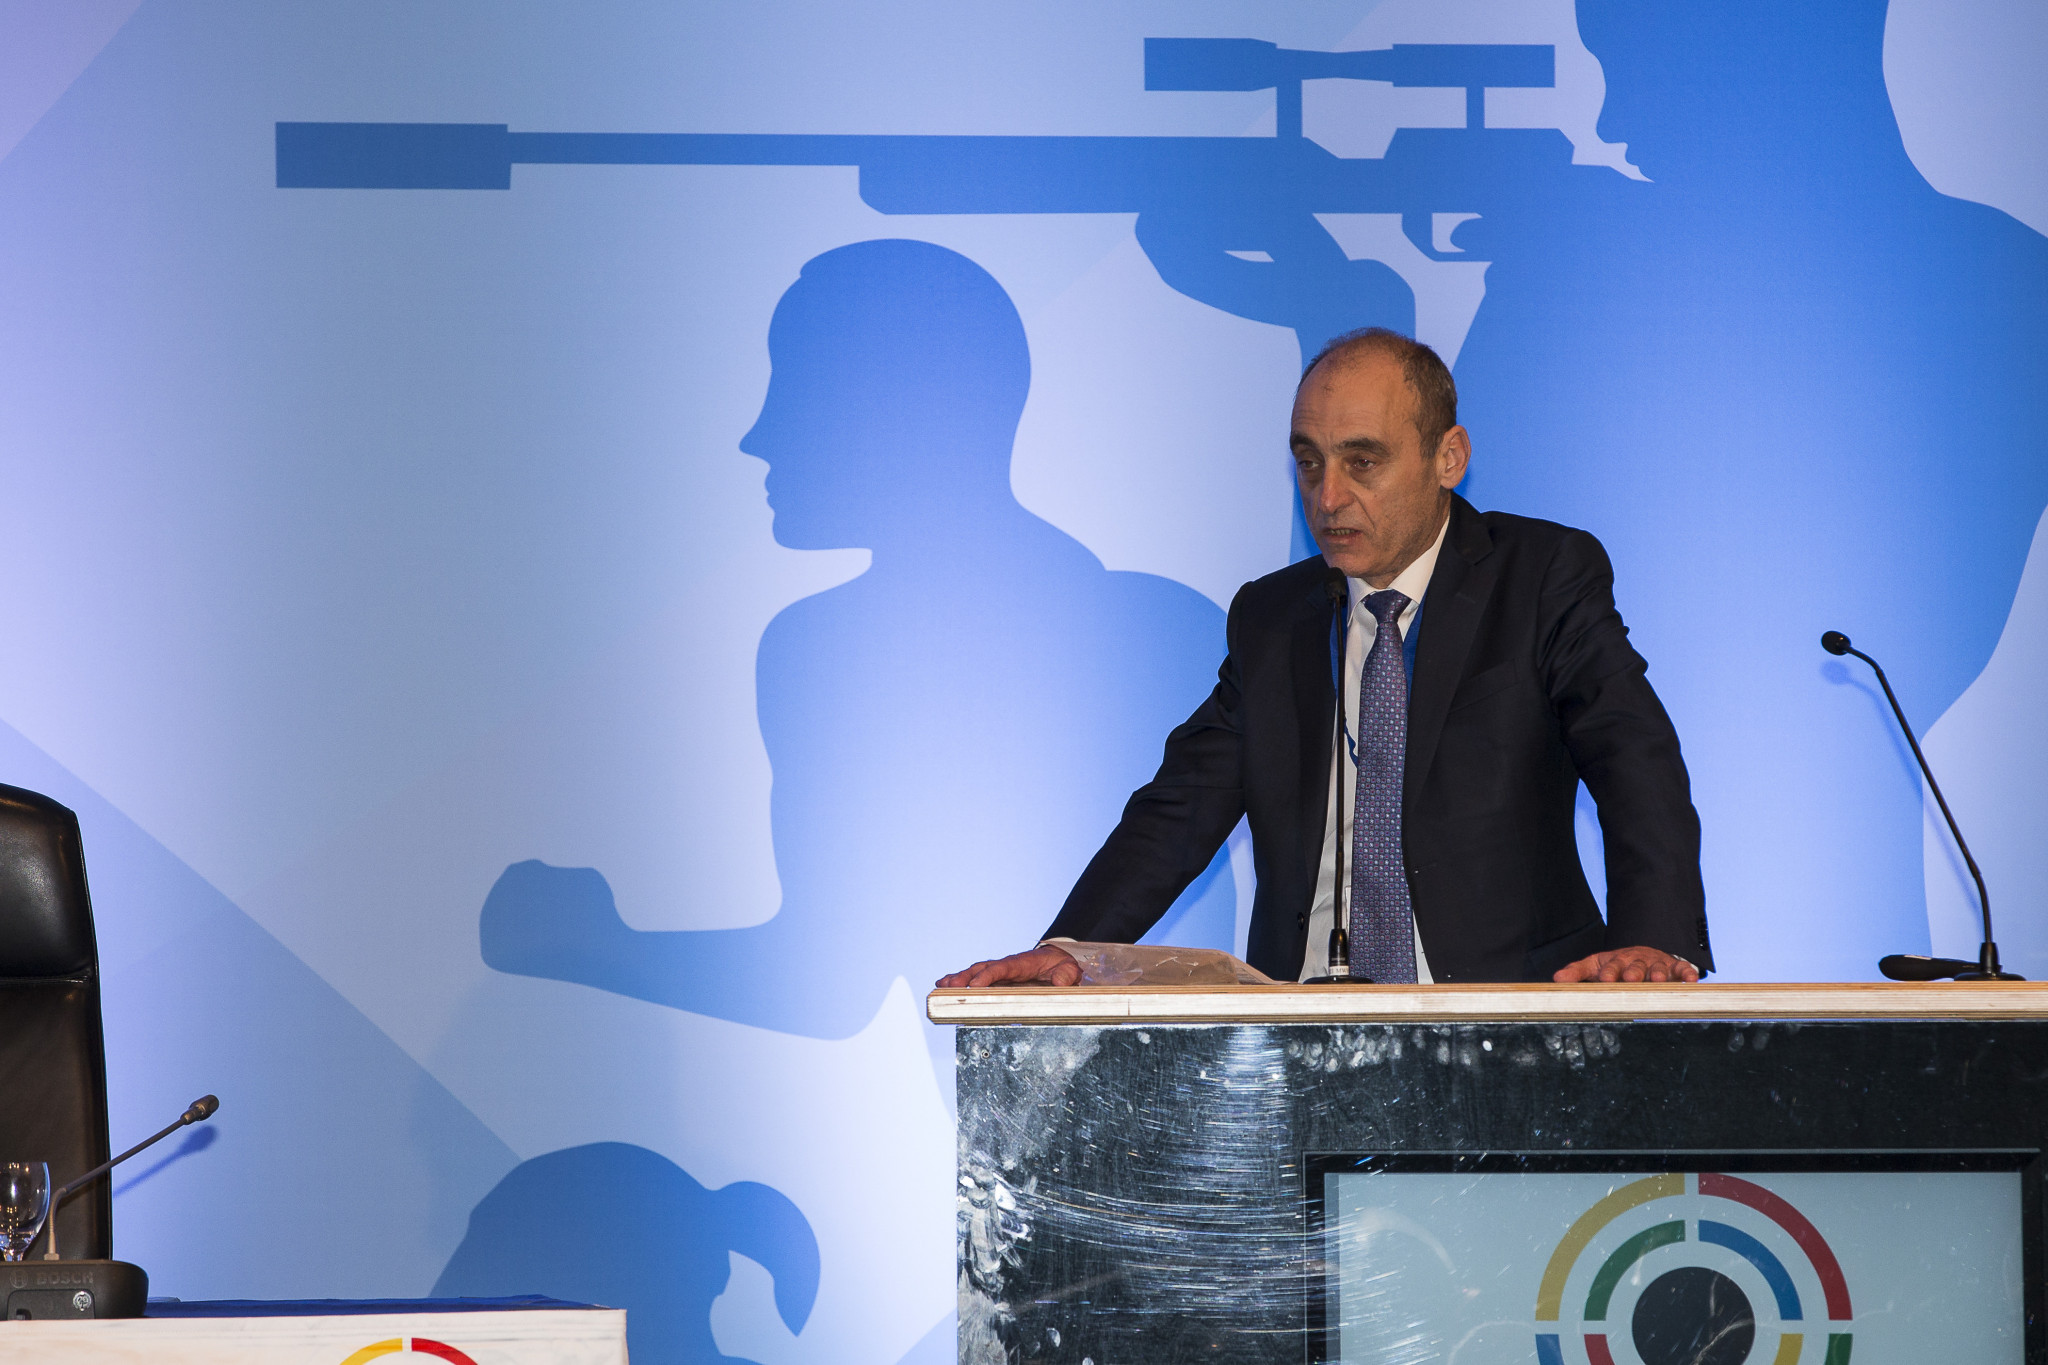 Shooting should be in all major competitions - ISSF secretary general